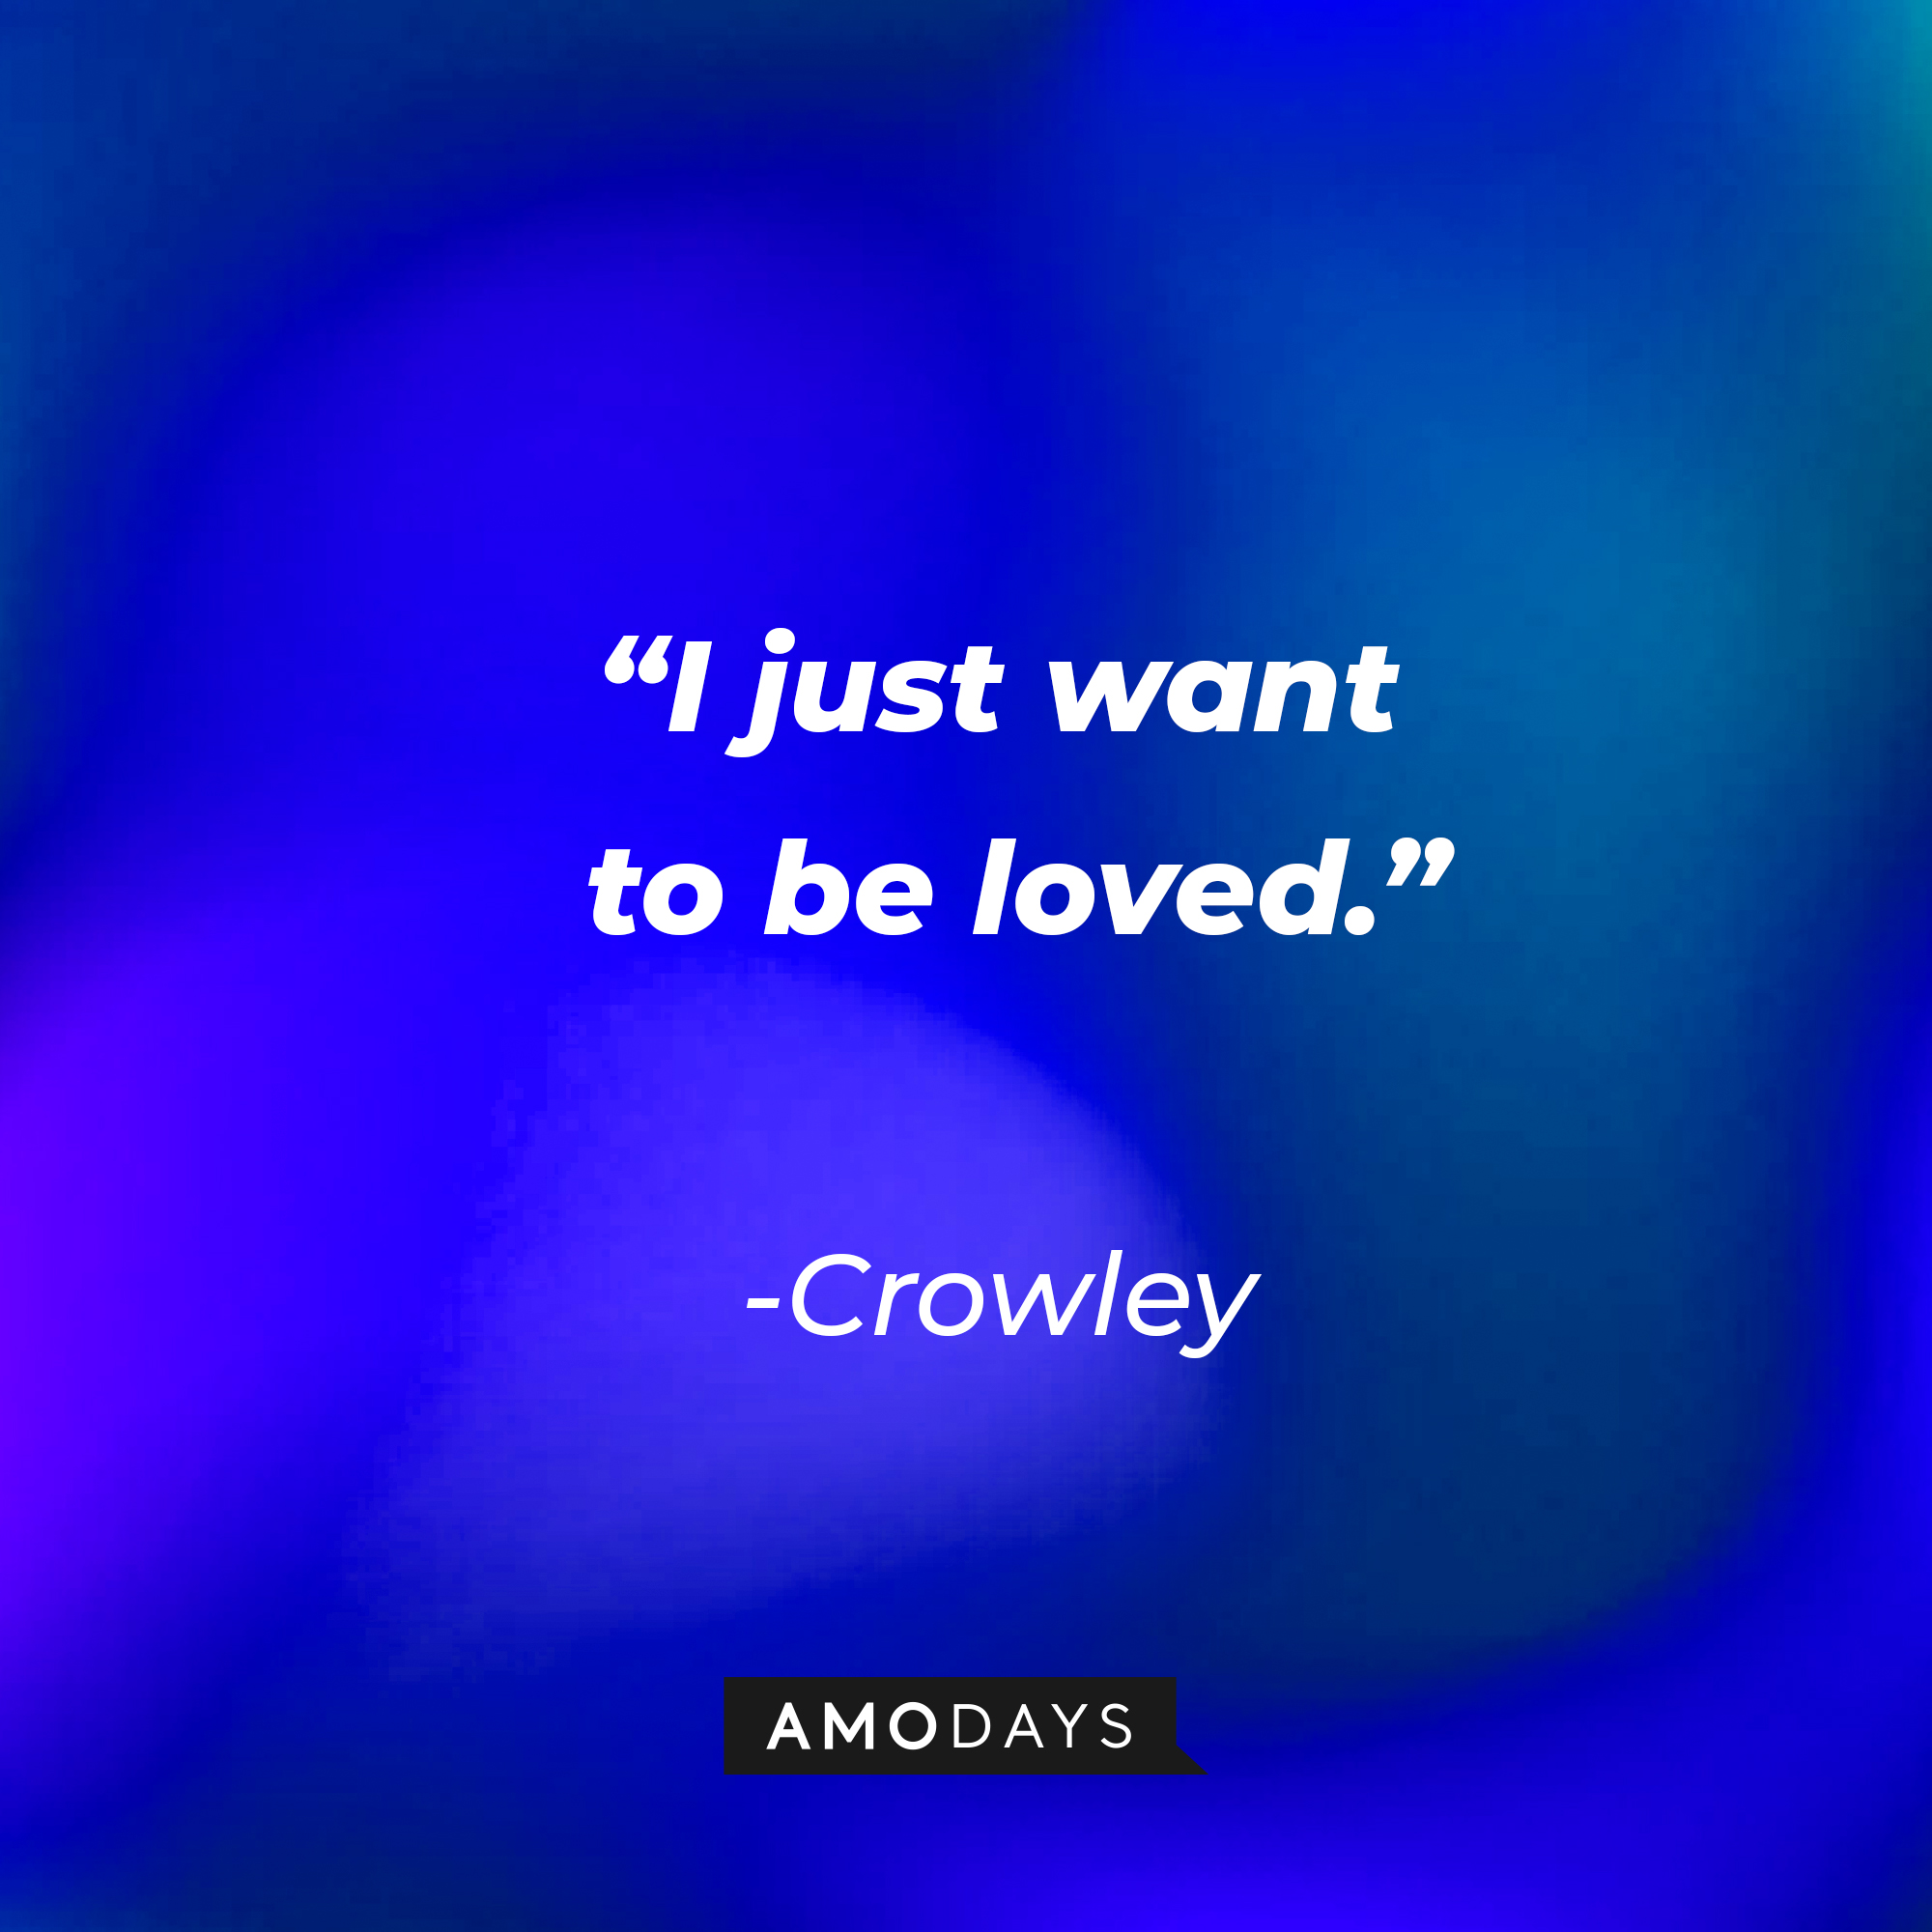 Crowley’s quote “I just want to be loved.” | Source: AmoDays